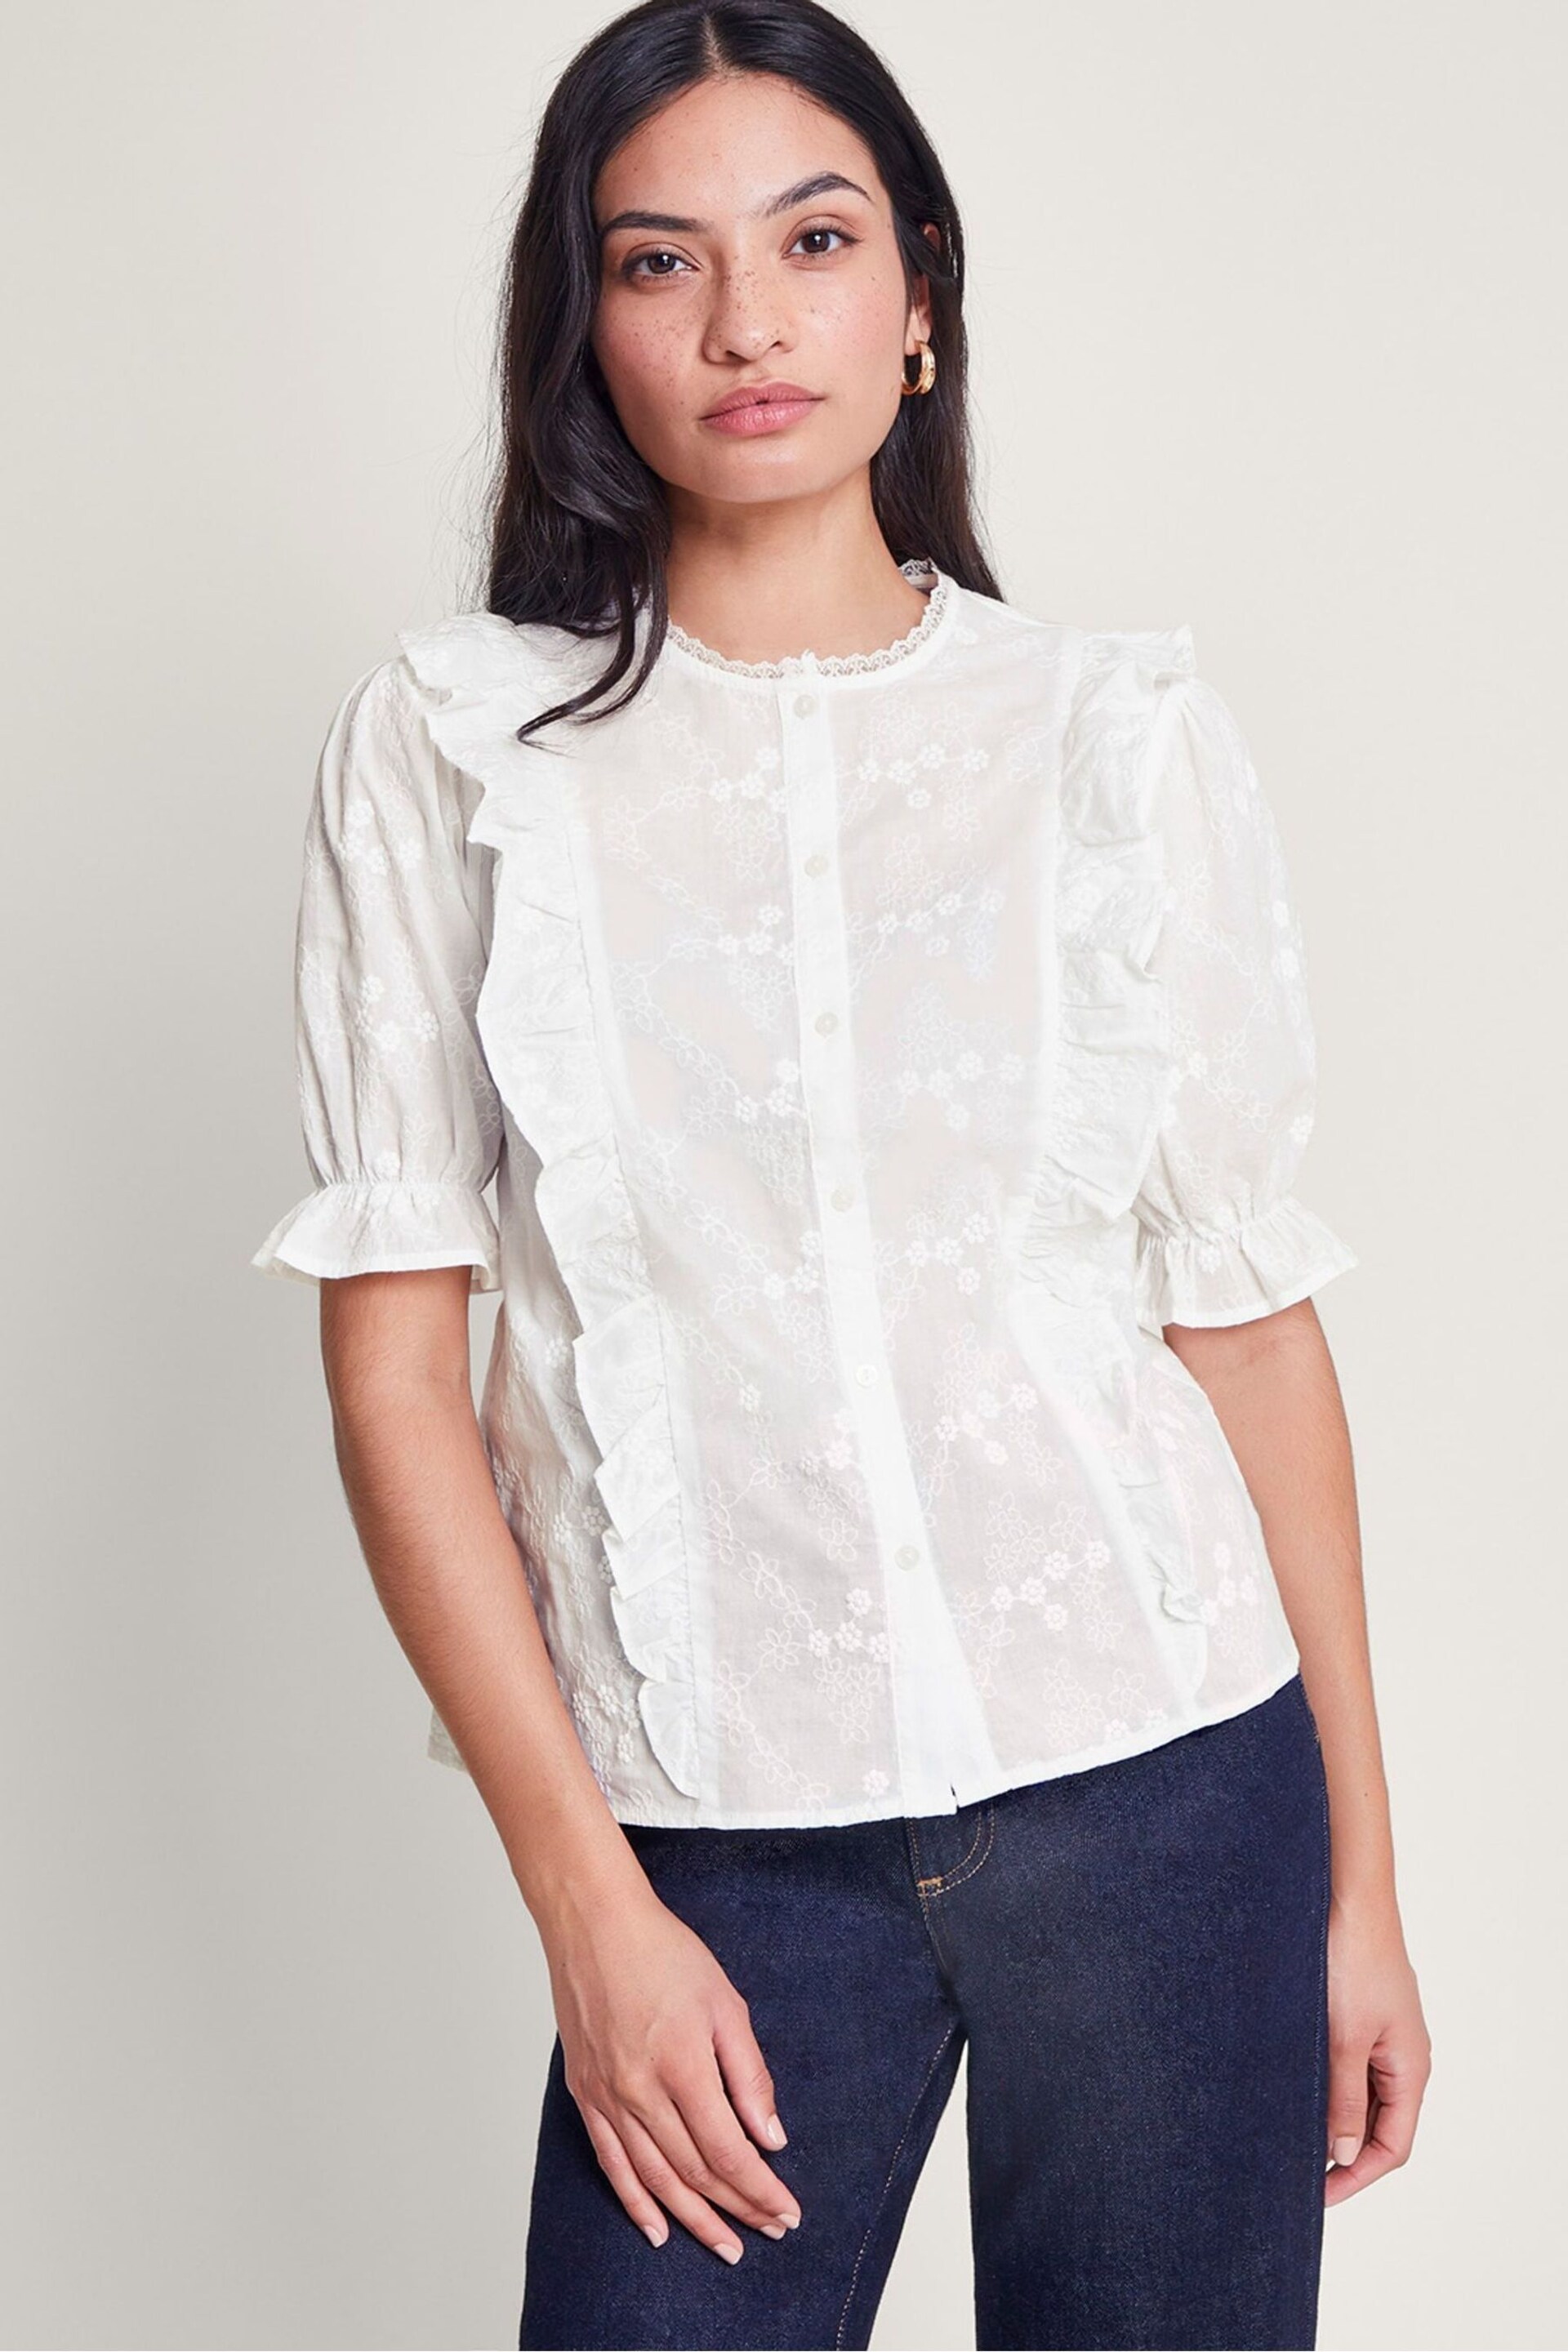 Monsoon White Embroidered Iris Blouse - Image 4 of 5